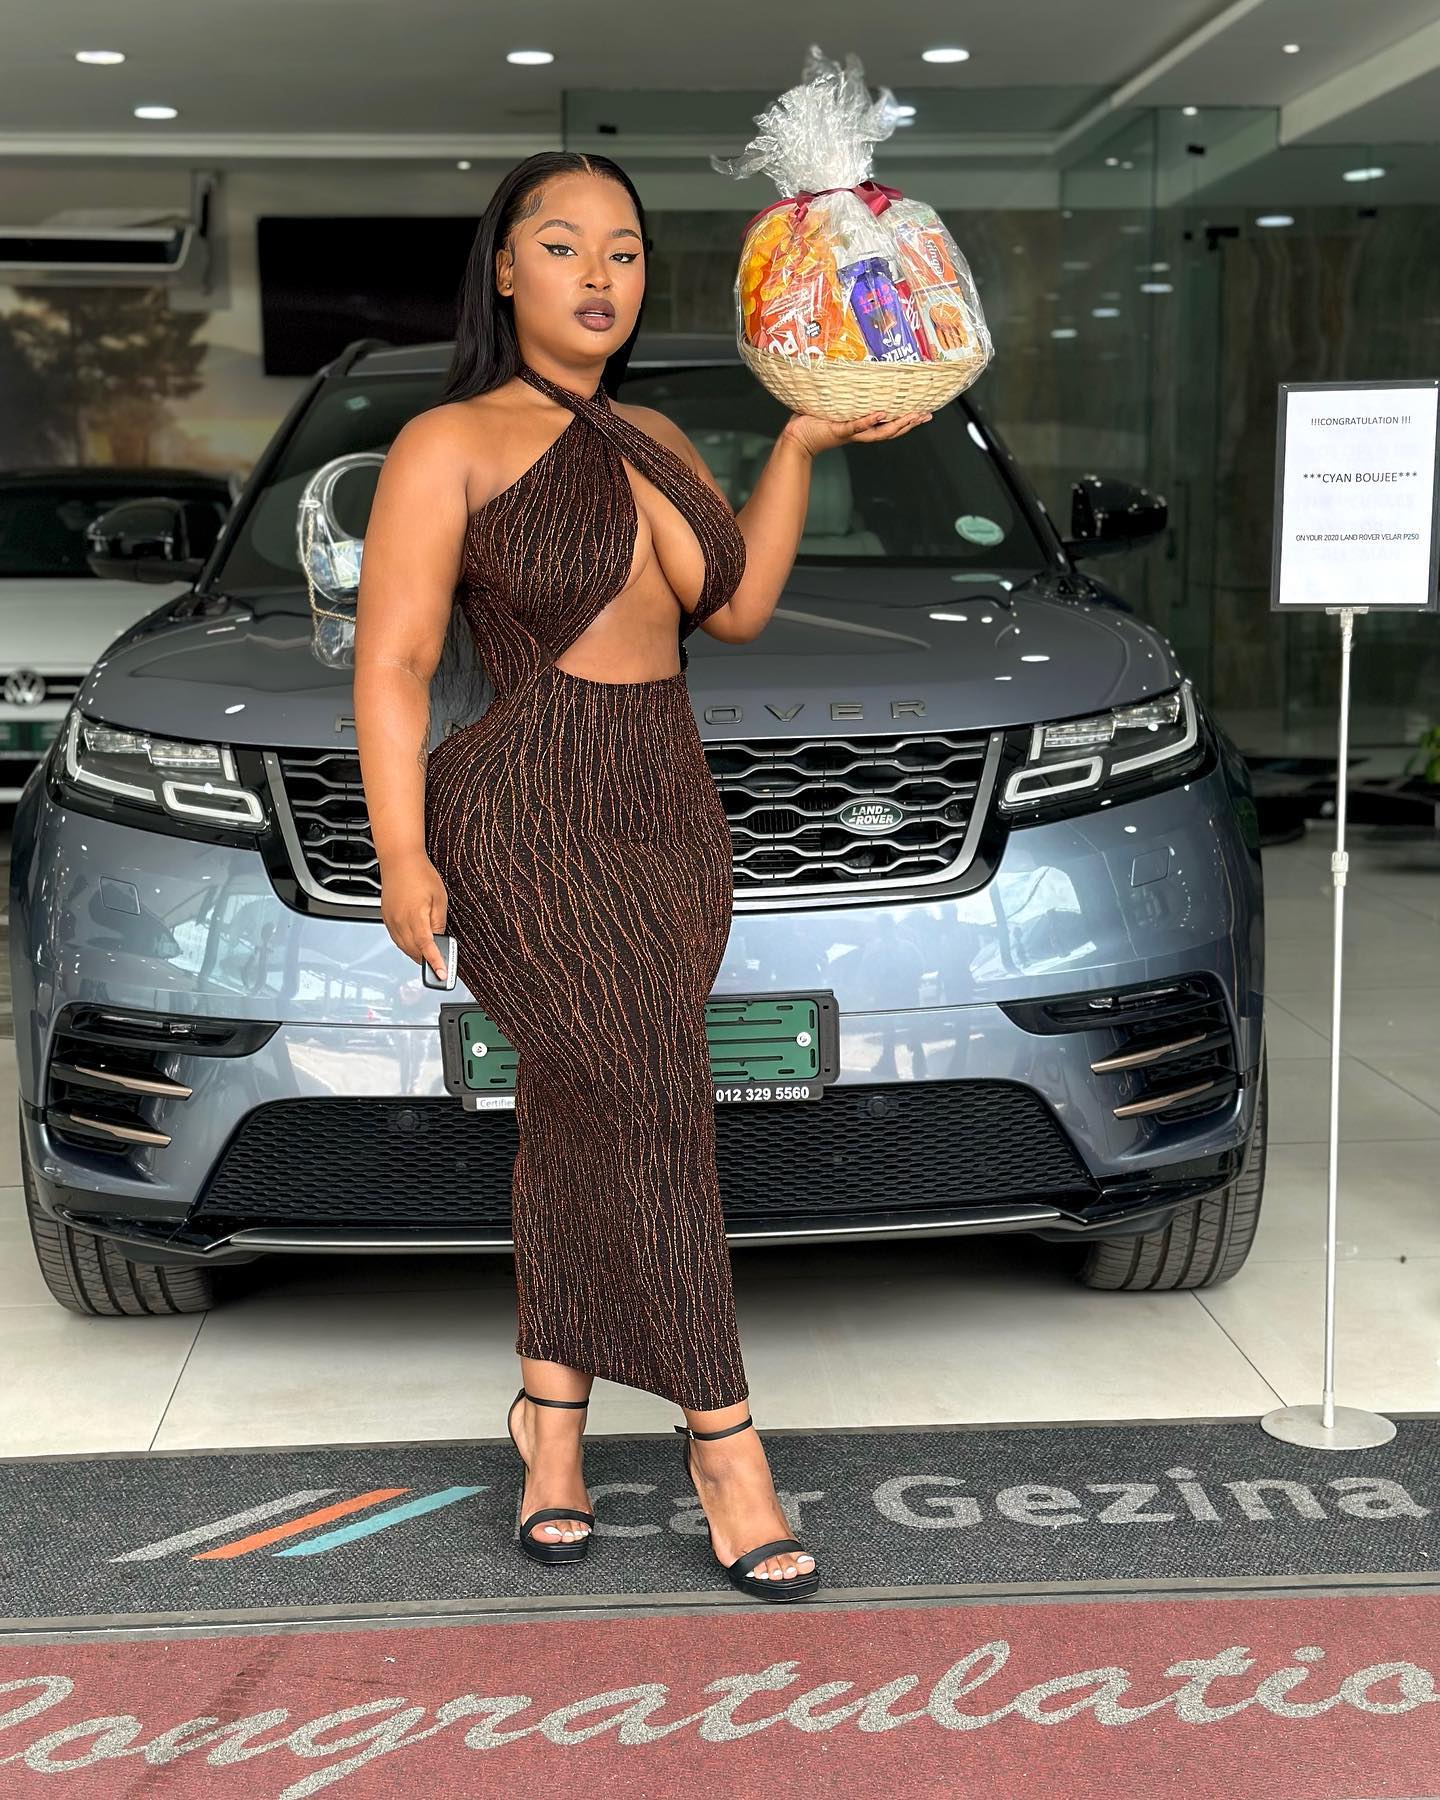 Cyan Boujee is attracting attention with her newly acquired Land Rover Velar. 26